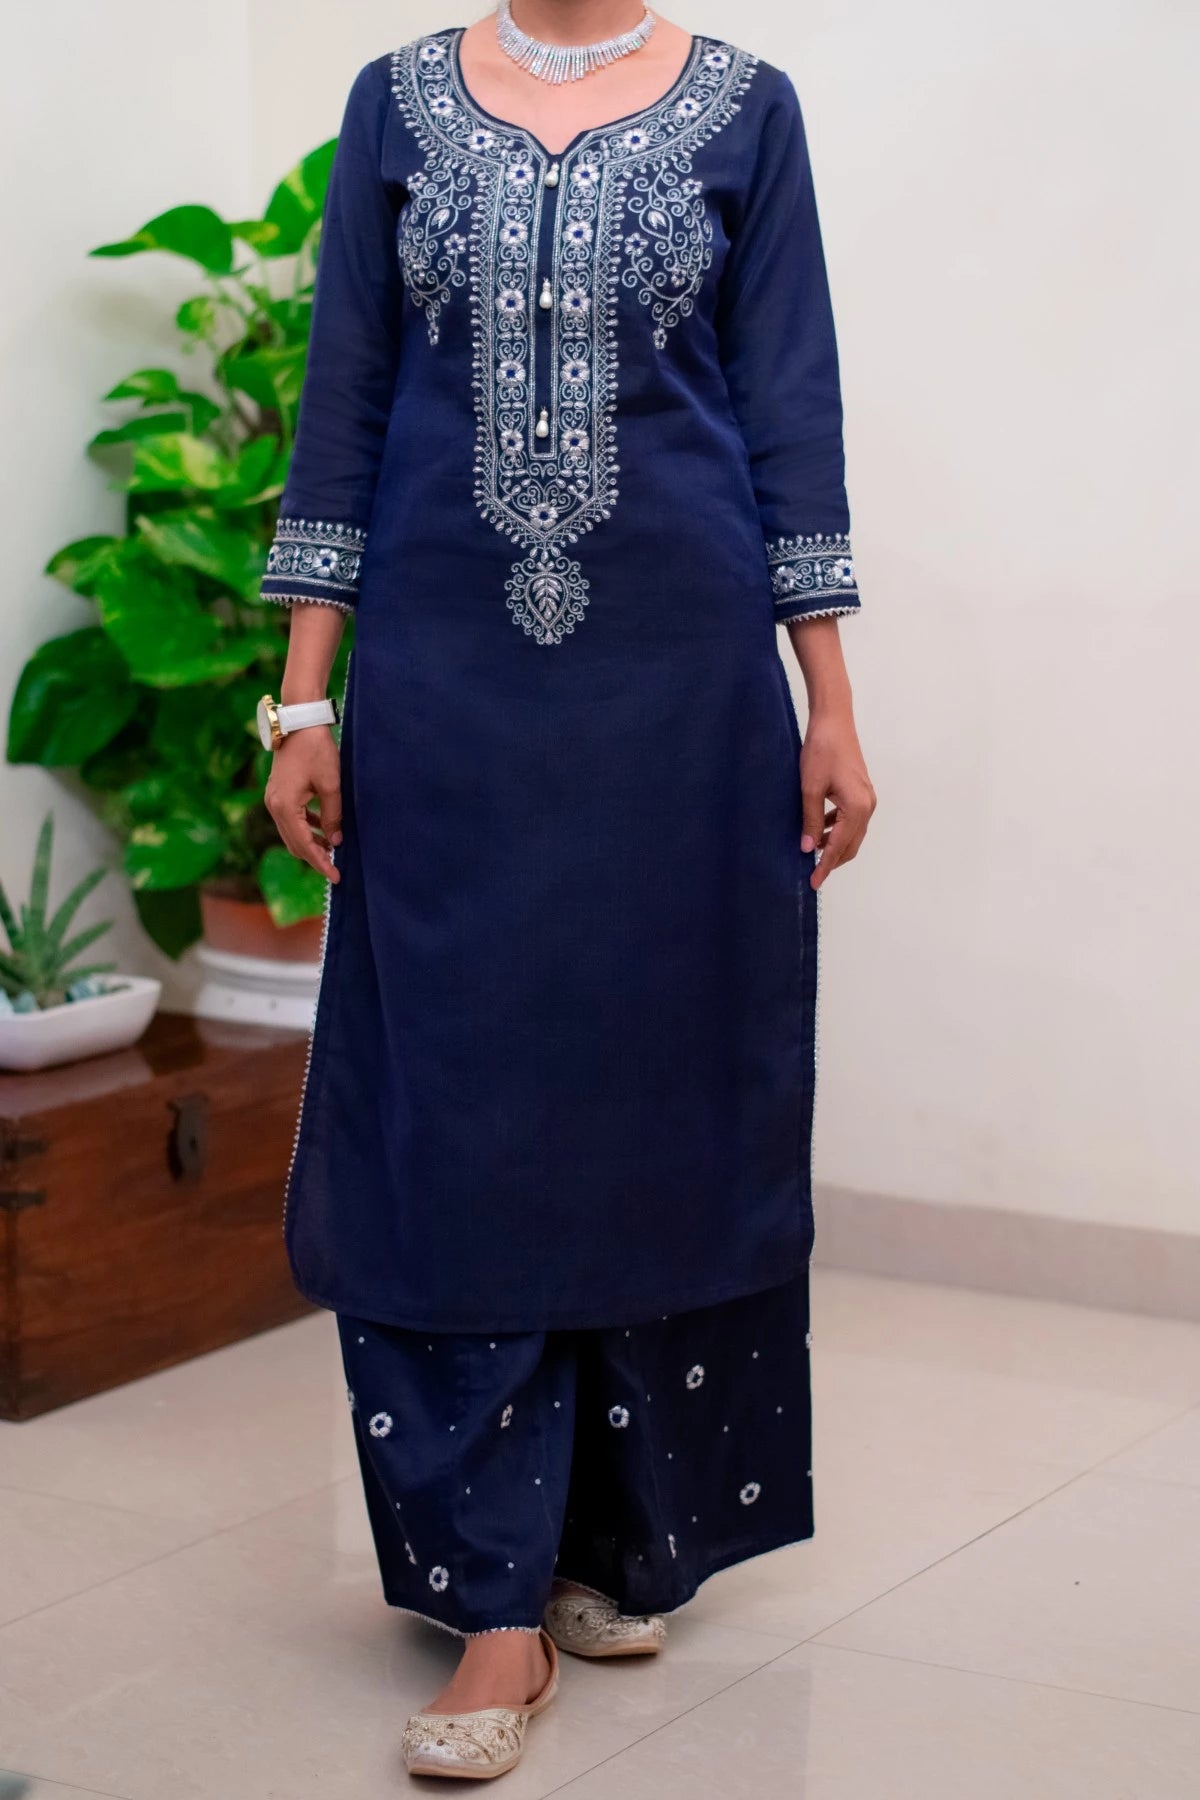 A stylish Indian woman wearing a blue kurta and a matching blue dupatta, looking elegant and confident.